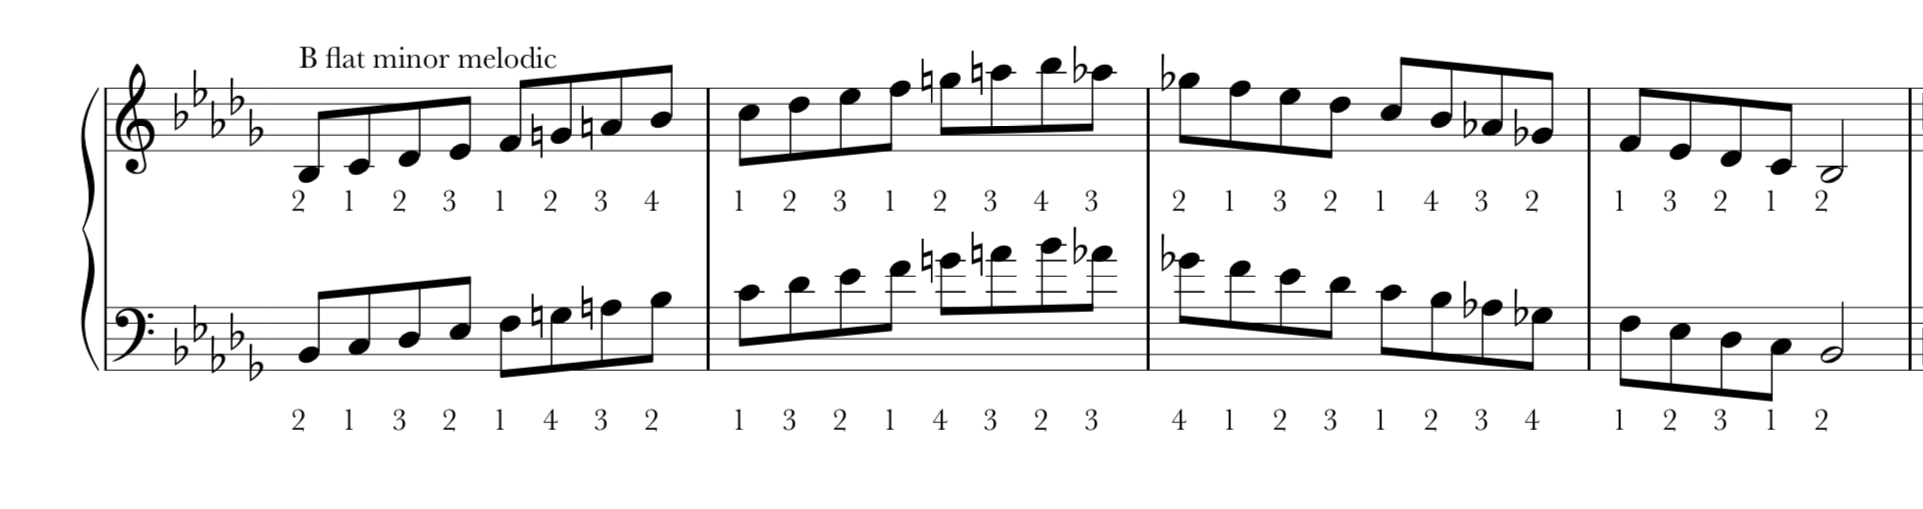 concert b flat melodic minor scale